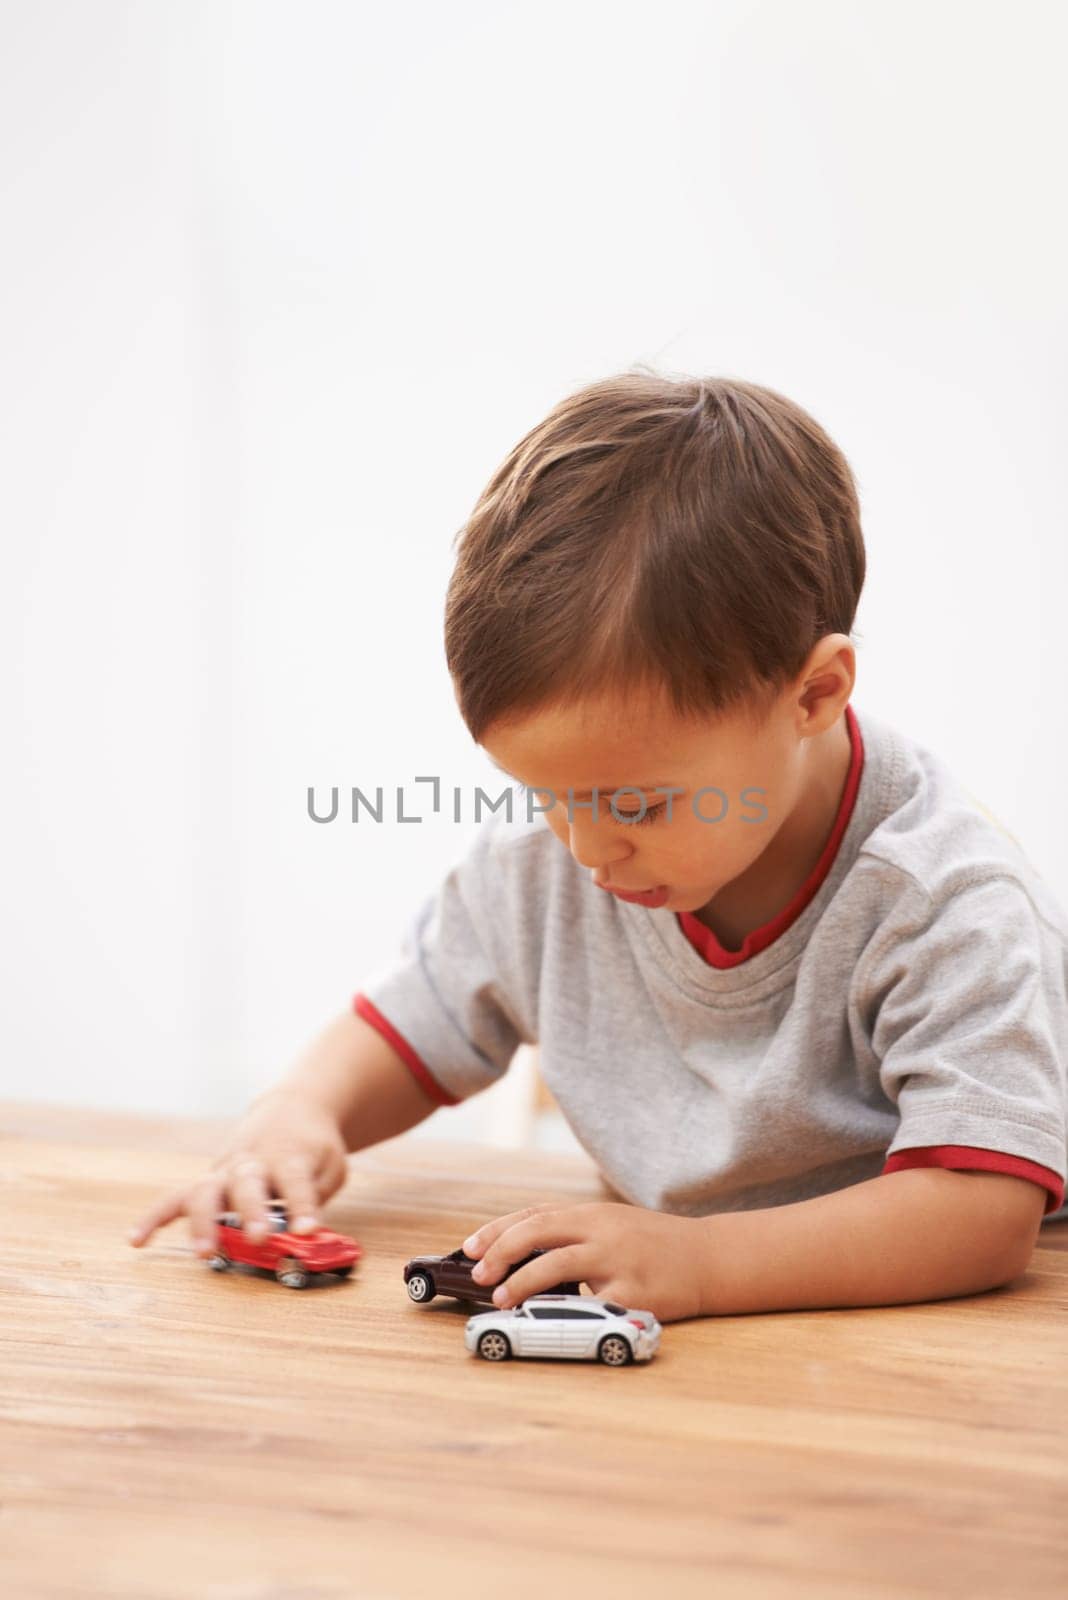 Cars, toys and boy child by table playing for learning, development and fun at modern home. Cute, sweet and young kid enjoying a game with plastic vehicles by wood for childhood hobby at house. by YuriArcurs